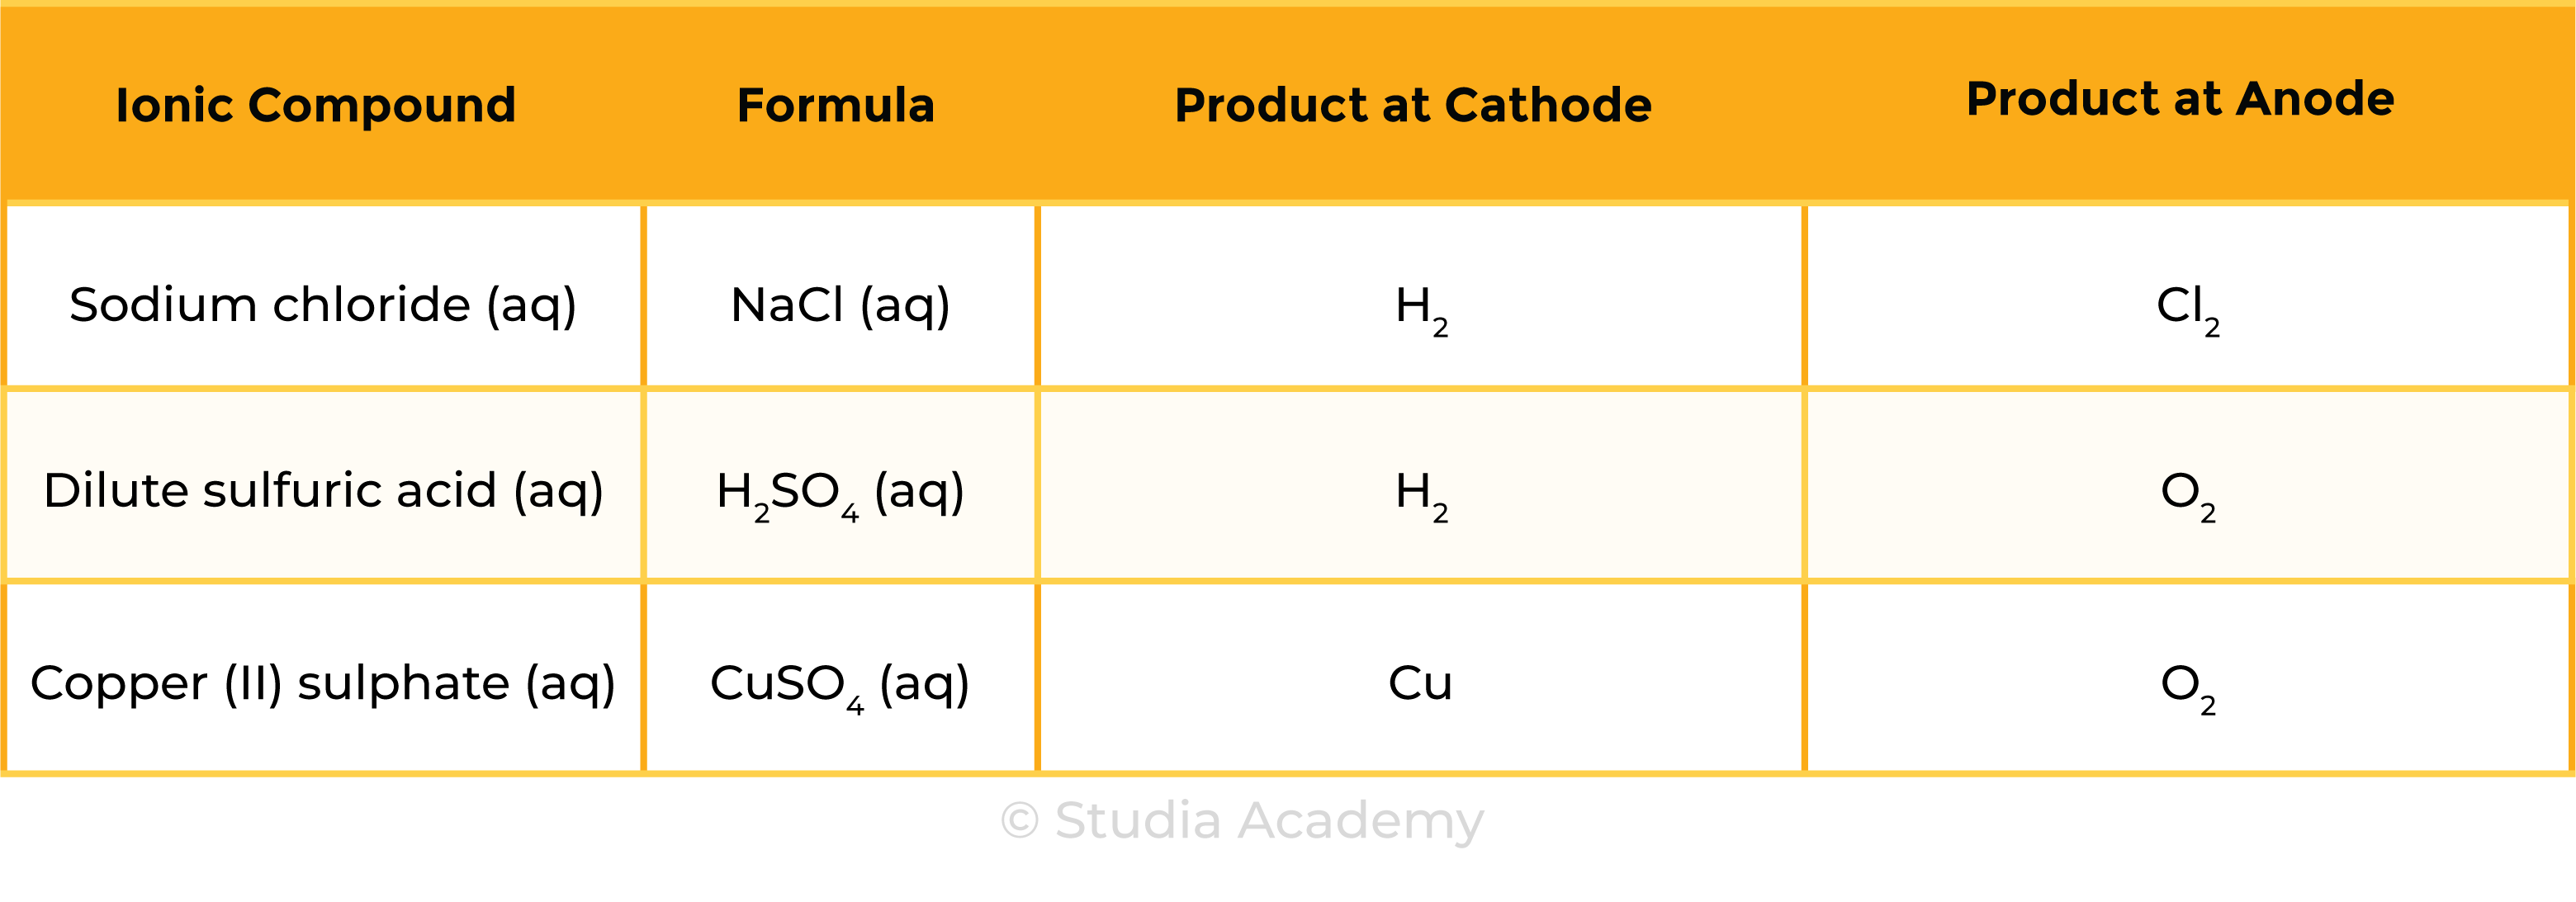 edexcel_igcse_chemistry_topic 09 tables_electrolysis_009_anode and cathode products examples